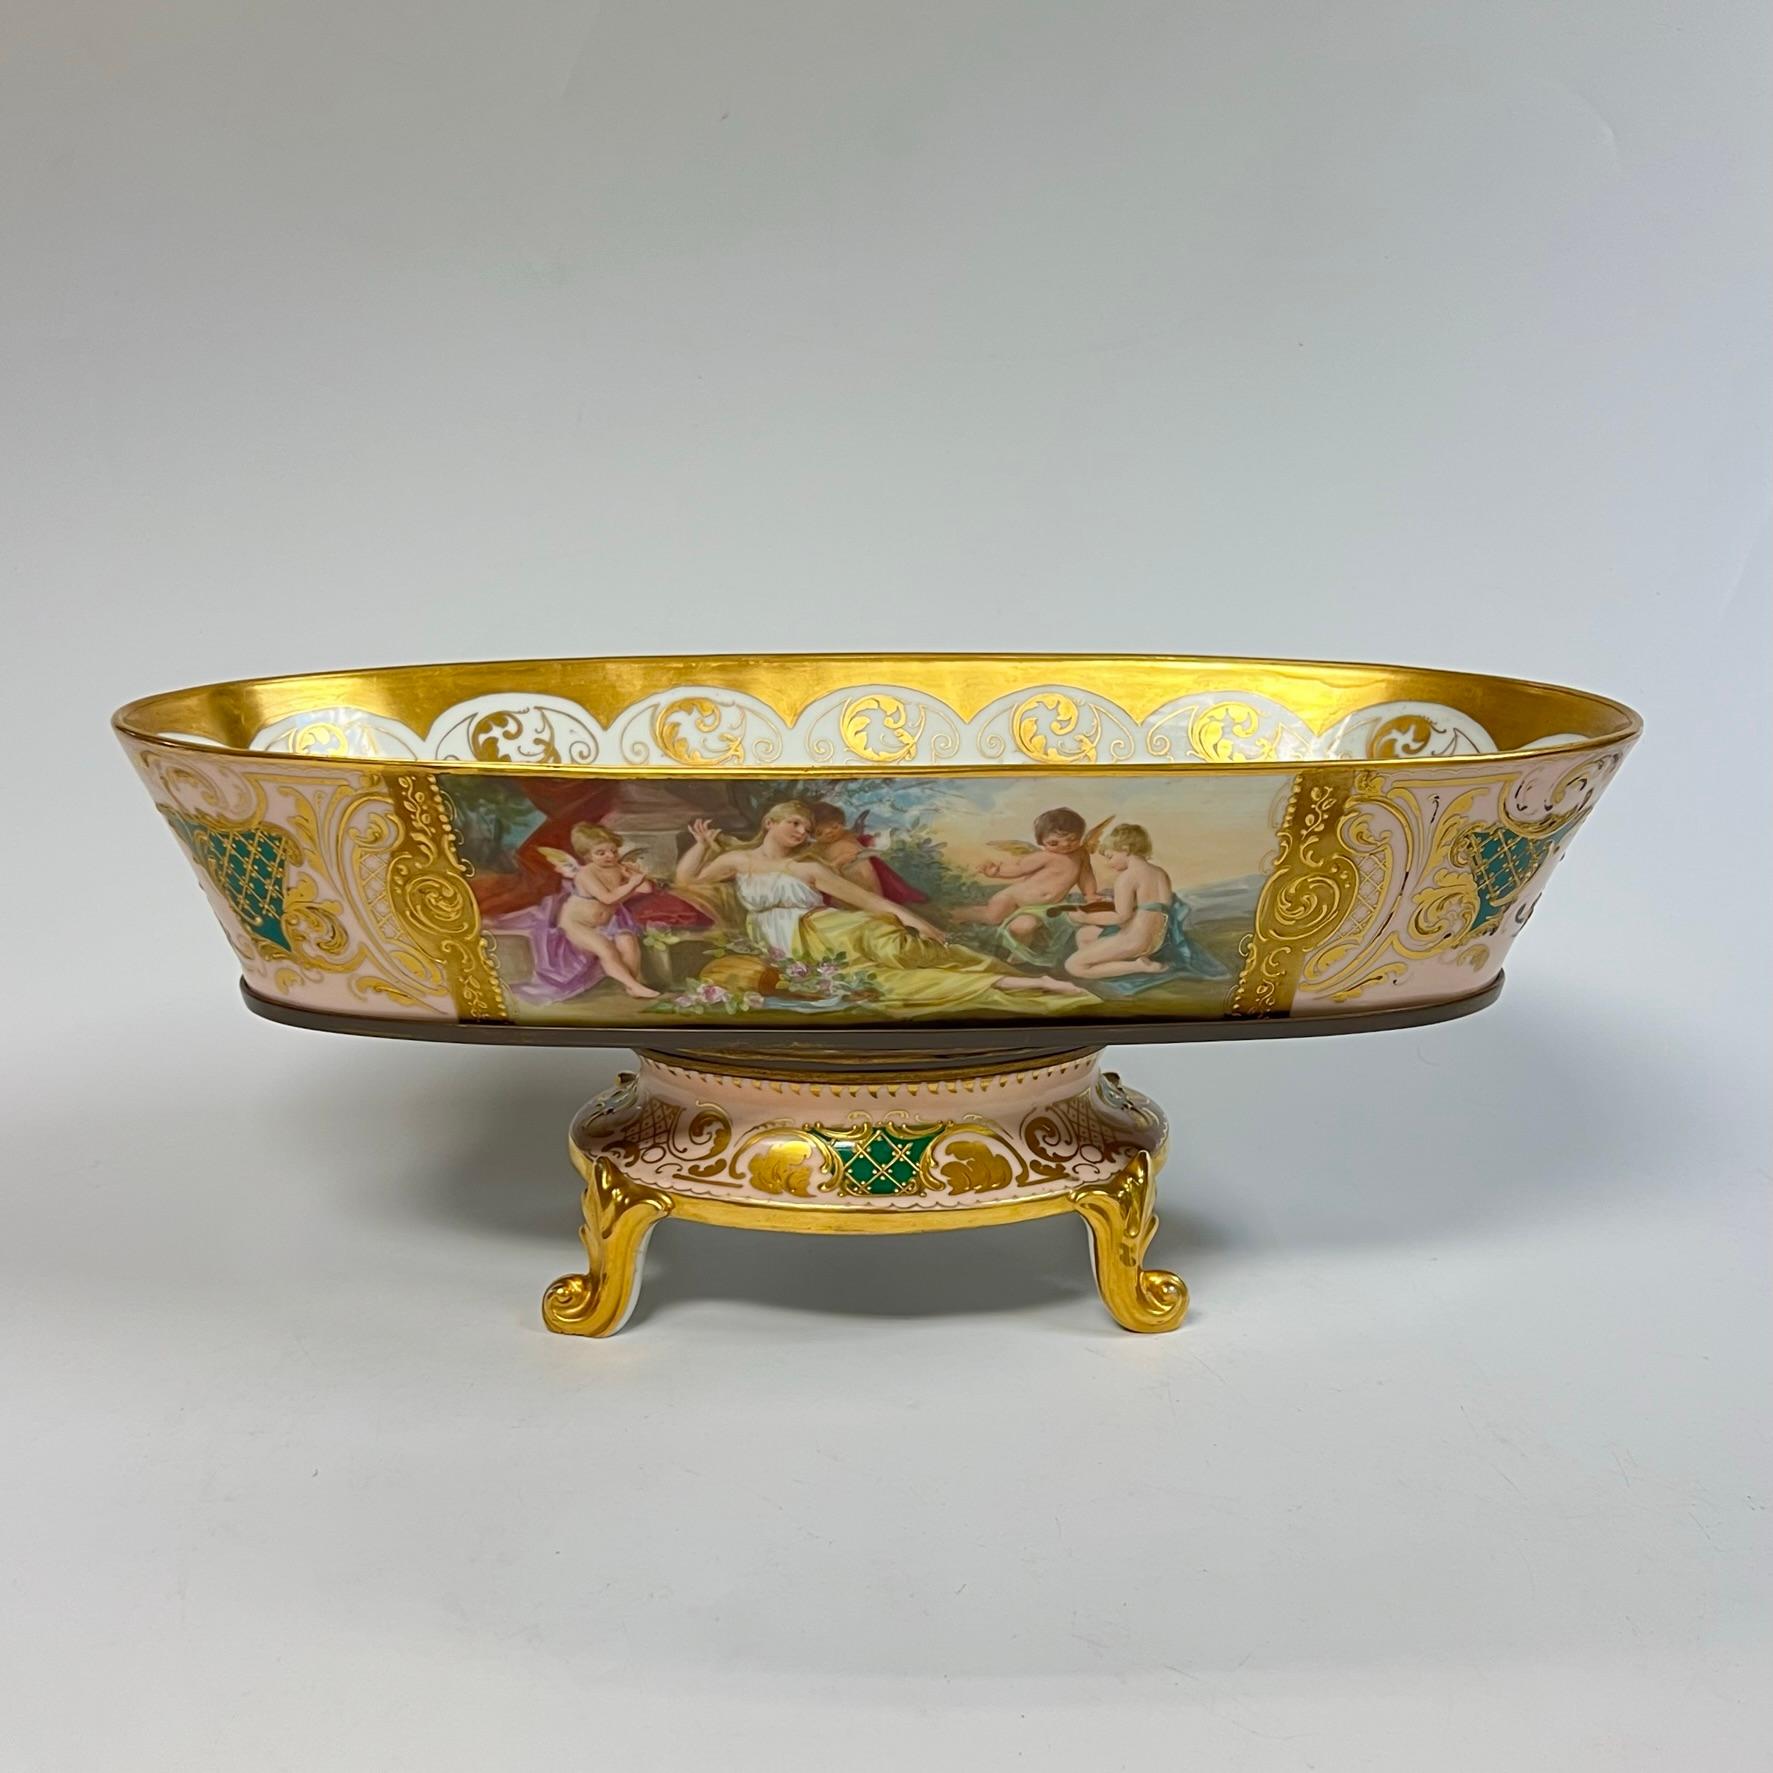 Oval shaped jardiniere or centerpiece bowl on footed stand from Royal Vienna.  6 1/2 by 16 3/4 by 8 1/4 inches, with gilt and hand-painted cartouches of Roman mythological scenes depicting goddesses and Cupid engaged in music and dance.  With Royal